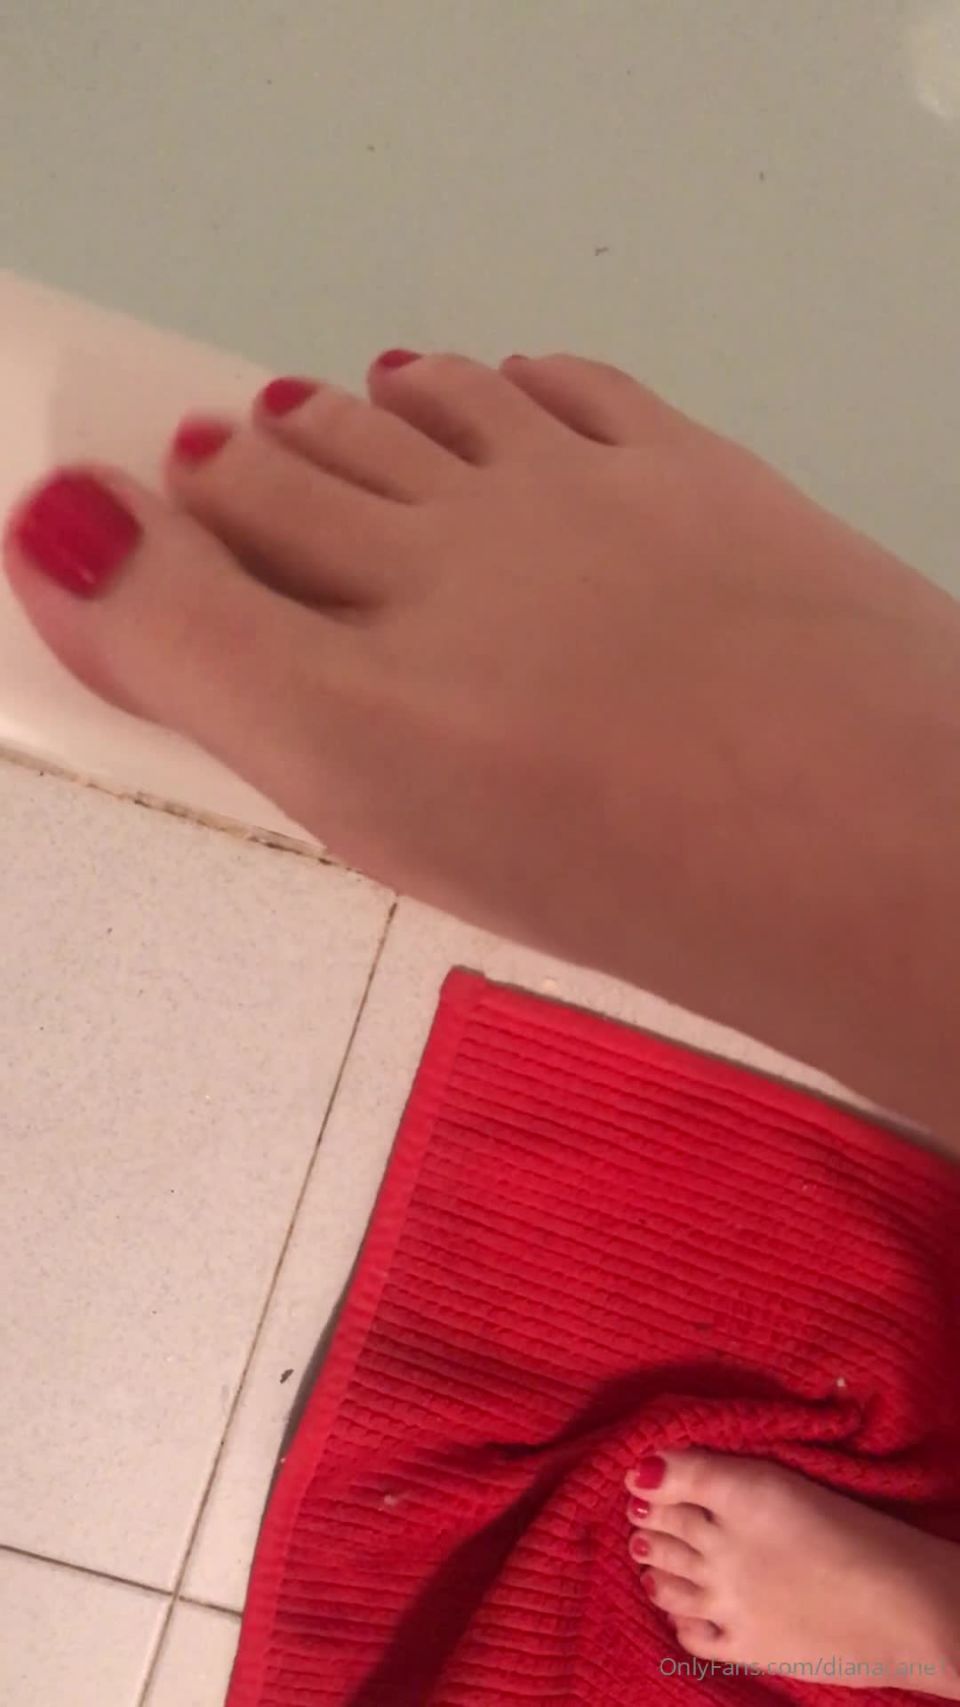 free porn video 31 dianacane 12-04-2020 Playing with my feet in my bathtub playing with the wat | foot | feet porn best foot fetish porn